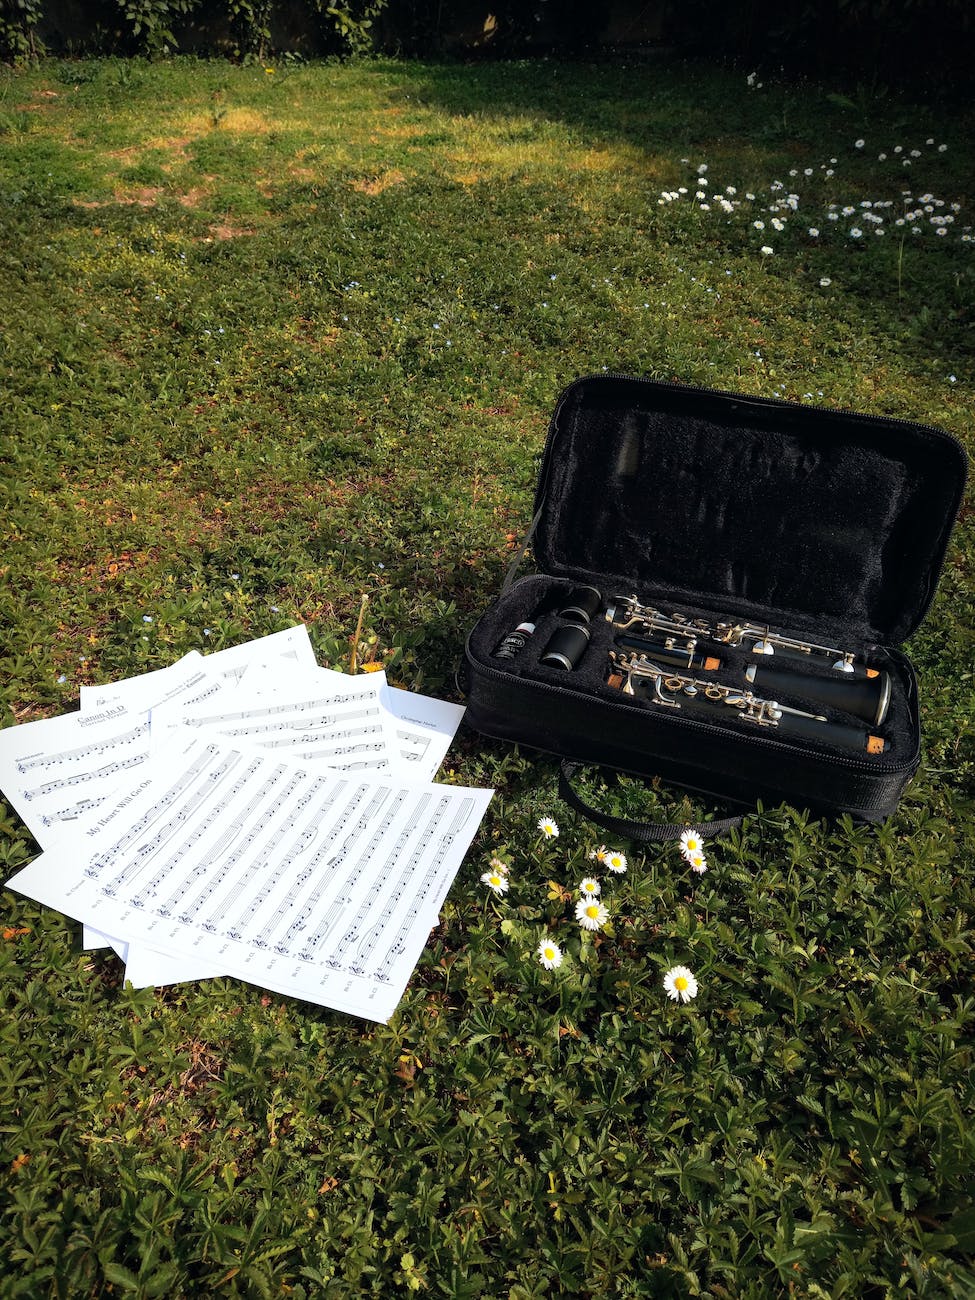 clarinet and music sheets on the grass